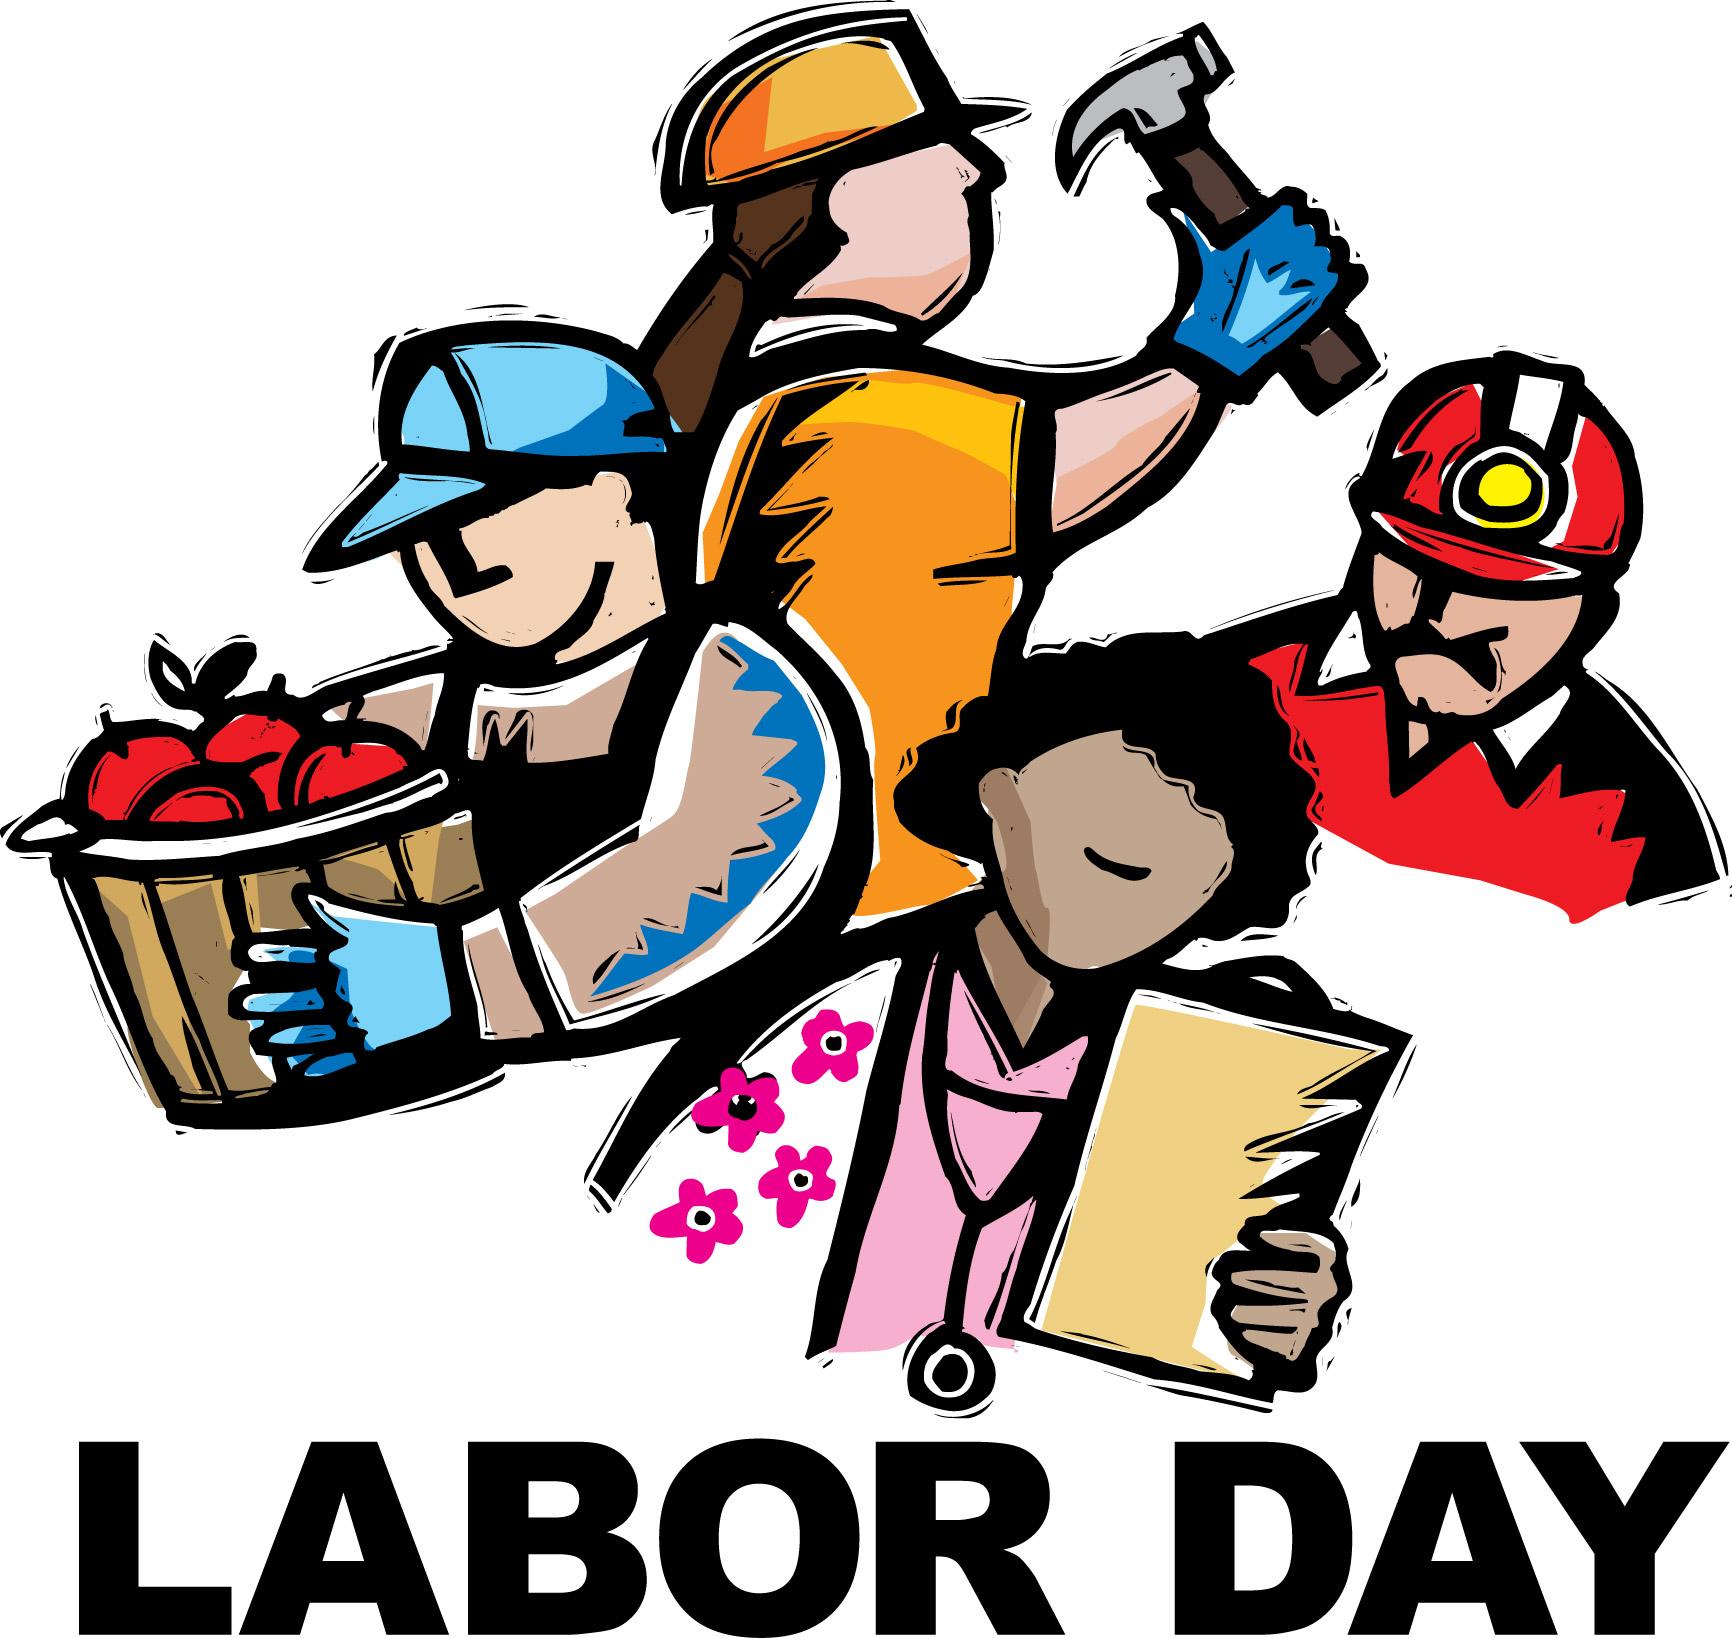 USA] Happy Labor Day Images,Pictures, Quotes 2016 for Holiday Weekend